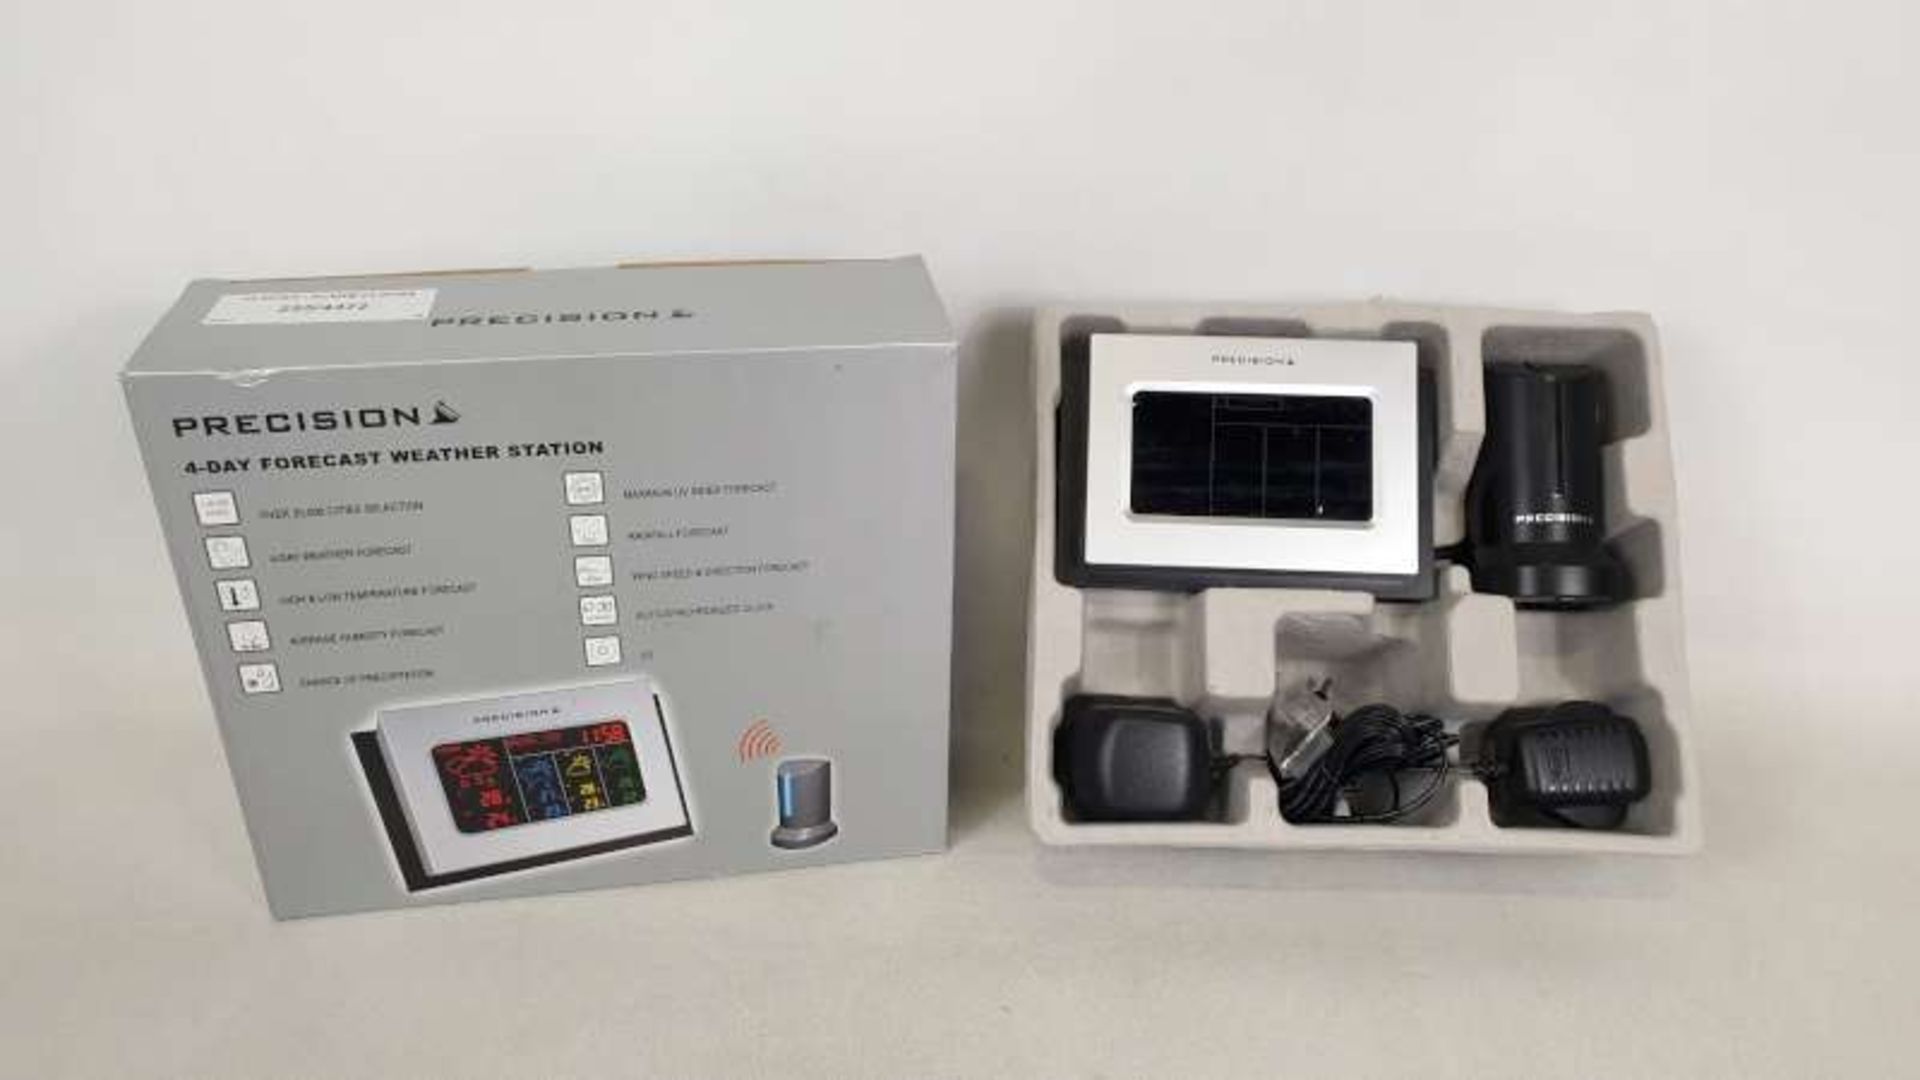 22 X PRECISION 4 DAY FORECAST WEATHER STATION IN 2 BOXES